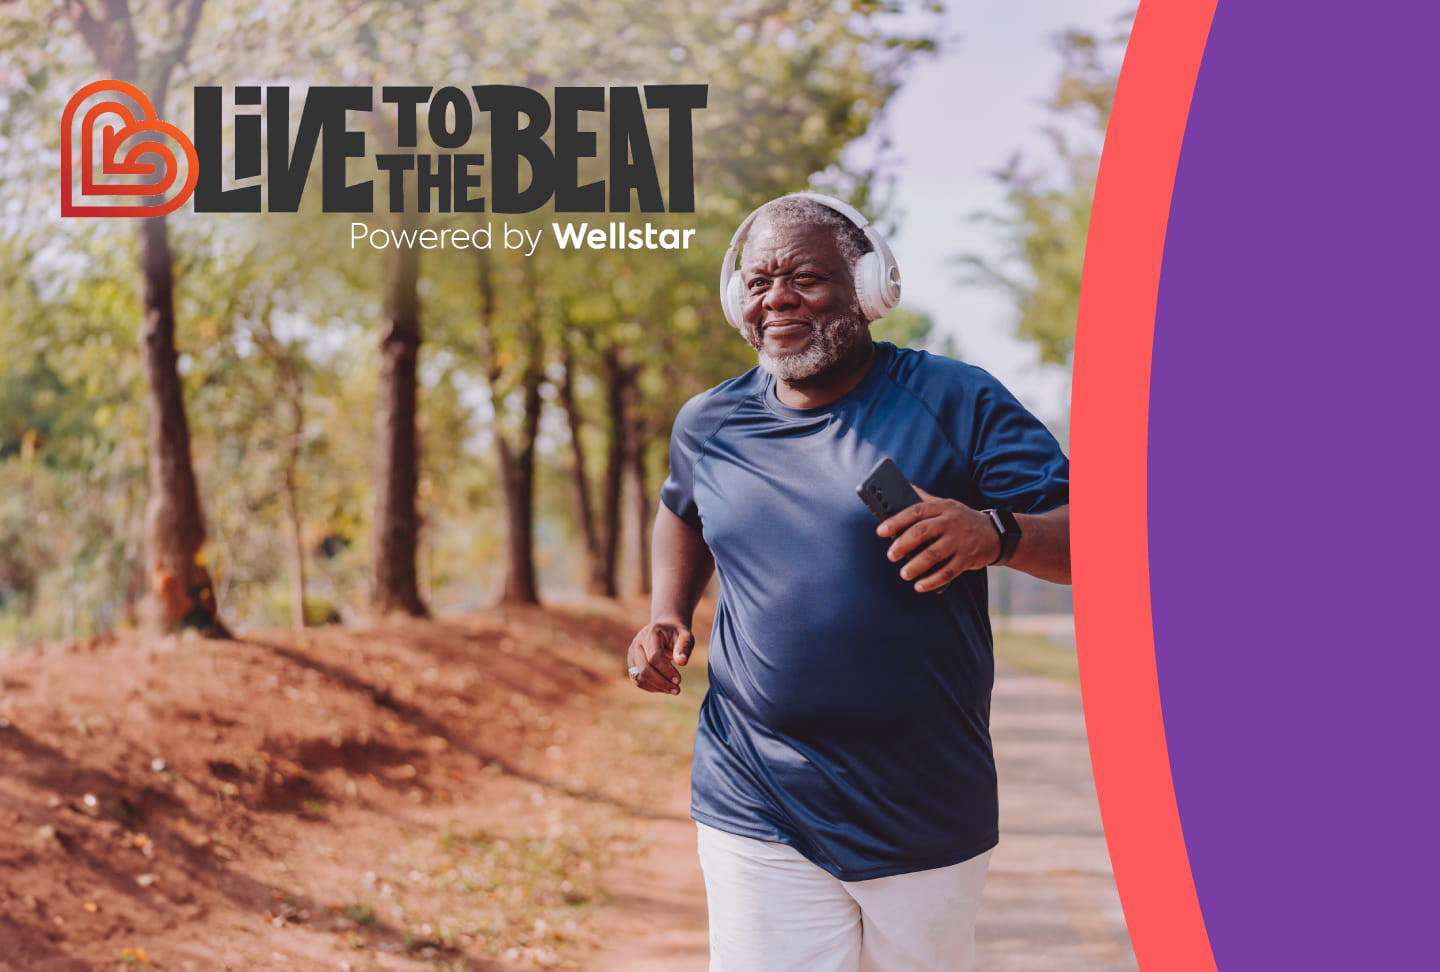 Smiling man jogging while listening to music. Reads Live to the Beat. Powered by Wellstar.